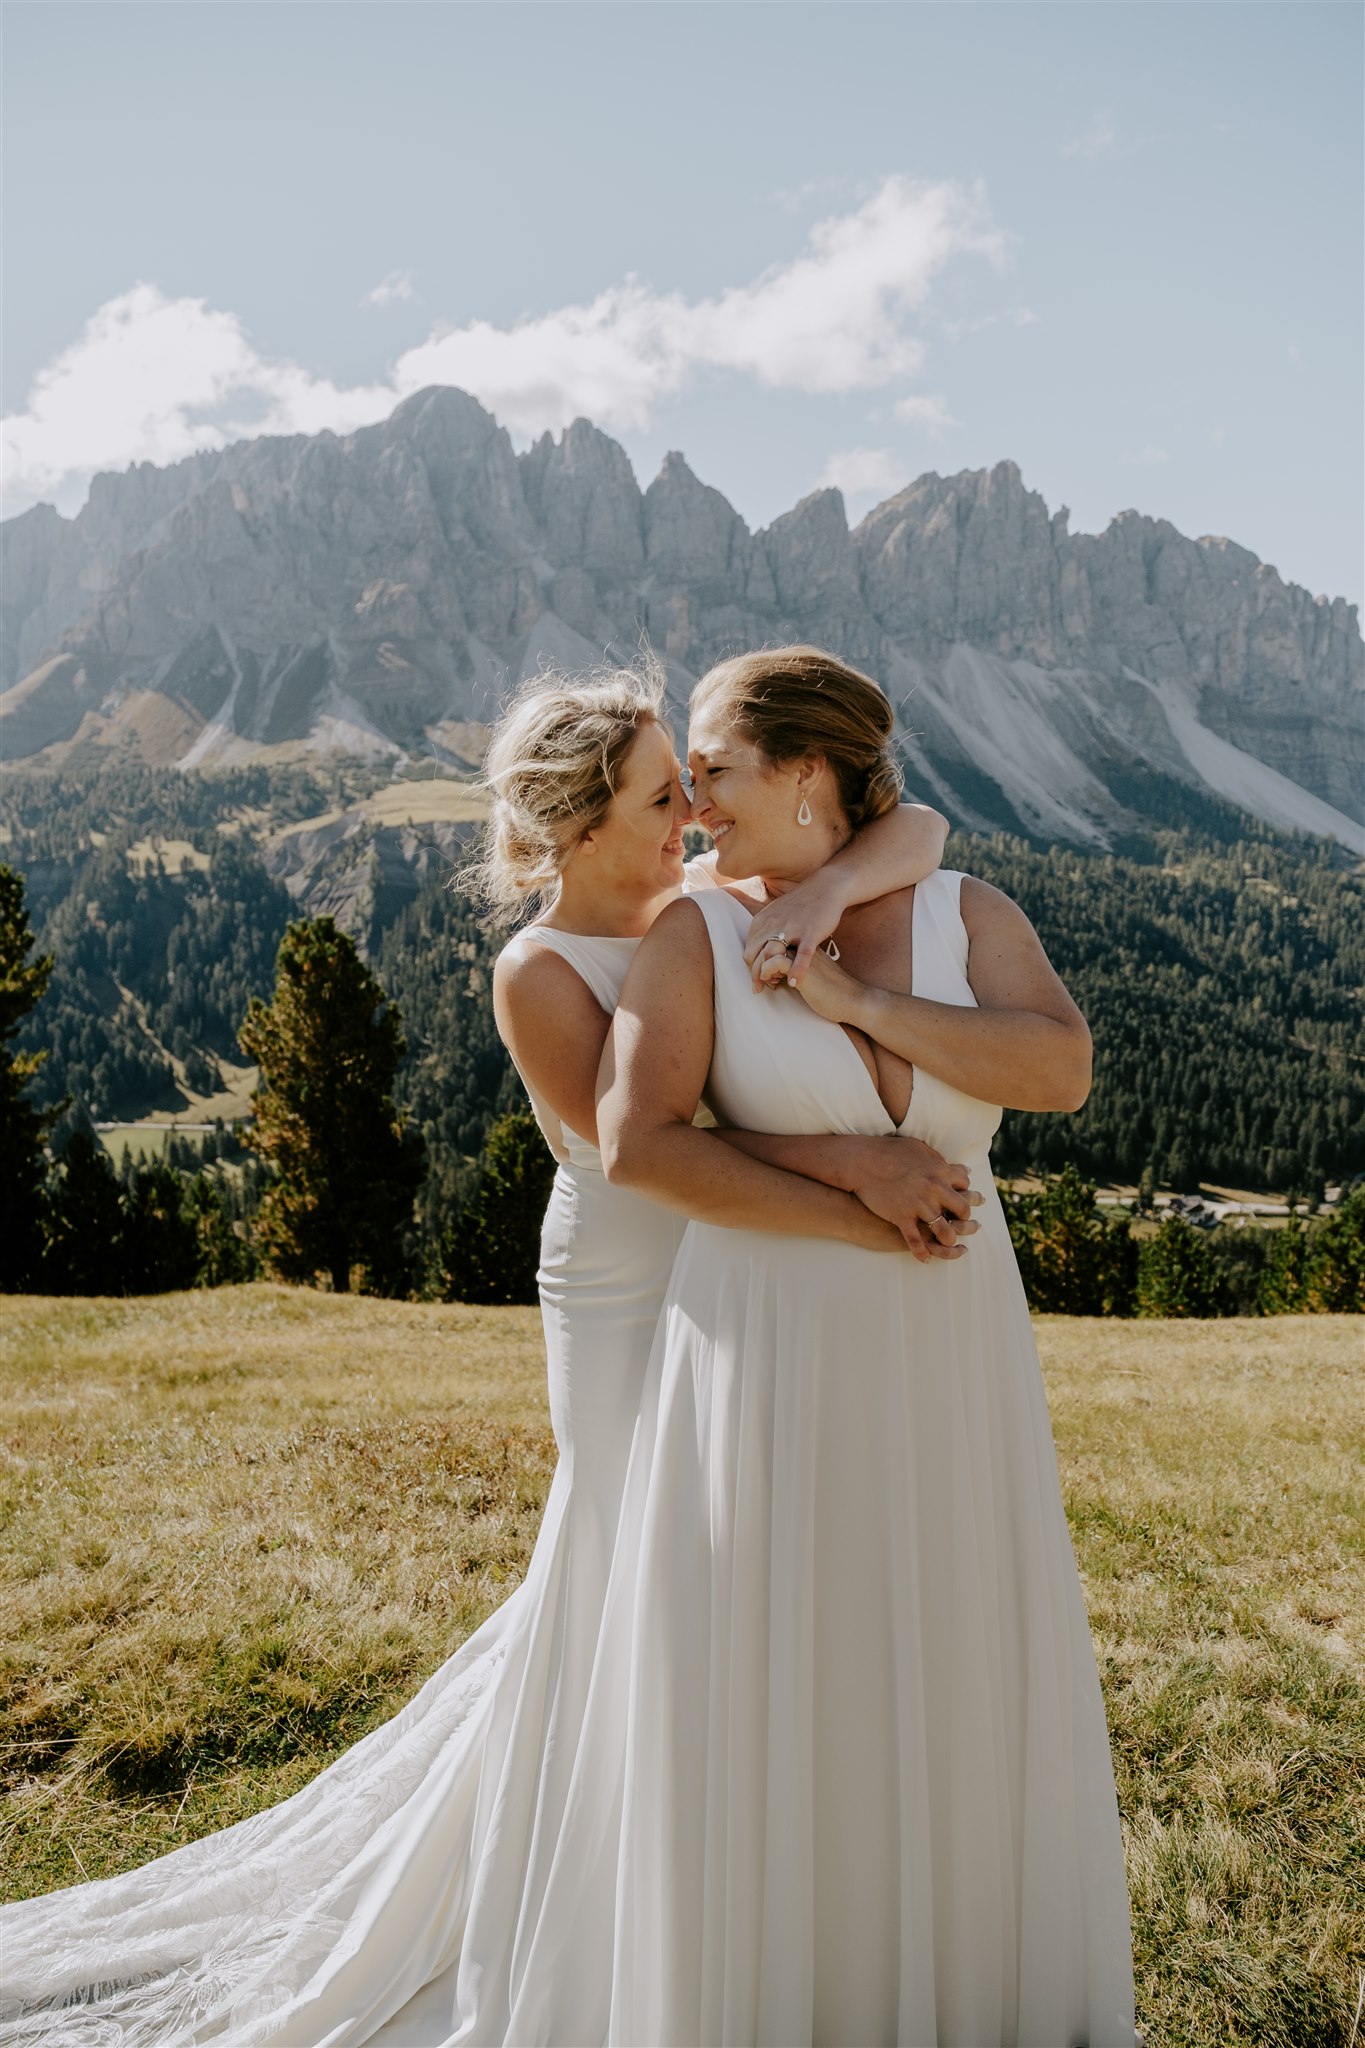 One bride stands behind her new wife, wrapping her arms around her waist, as the turn to each other and smile with the Dolomites in the background behind them.